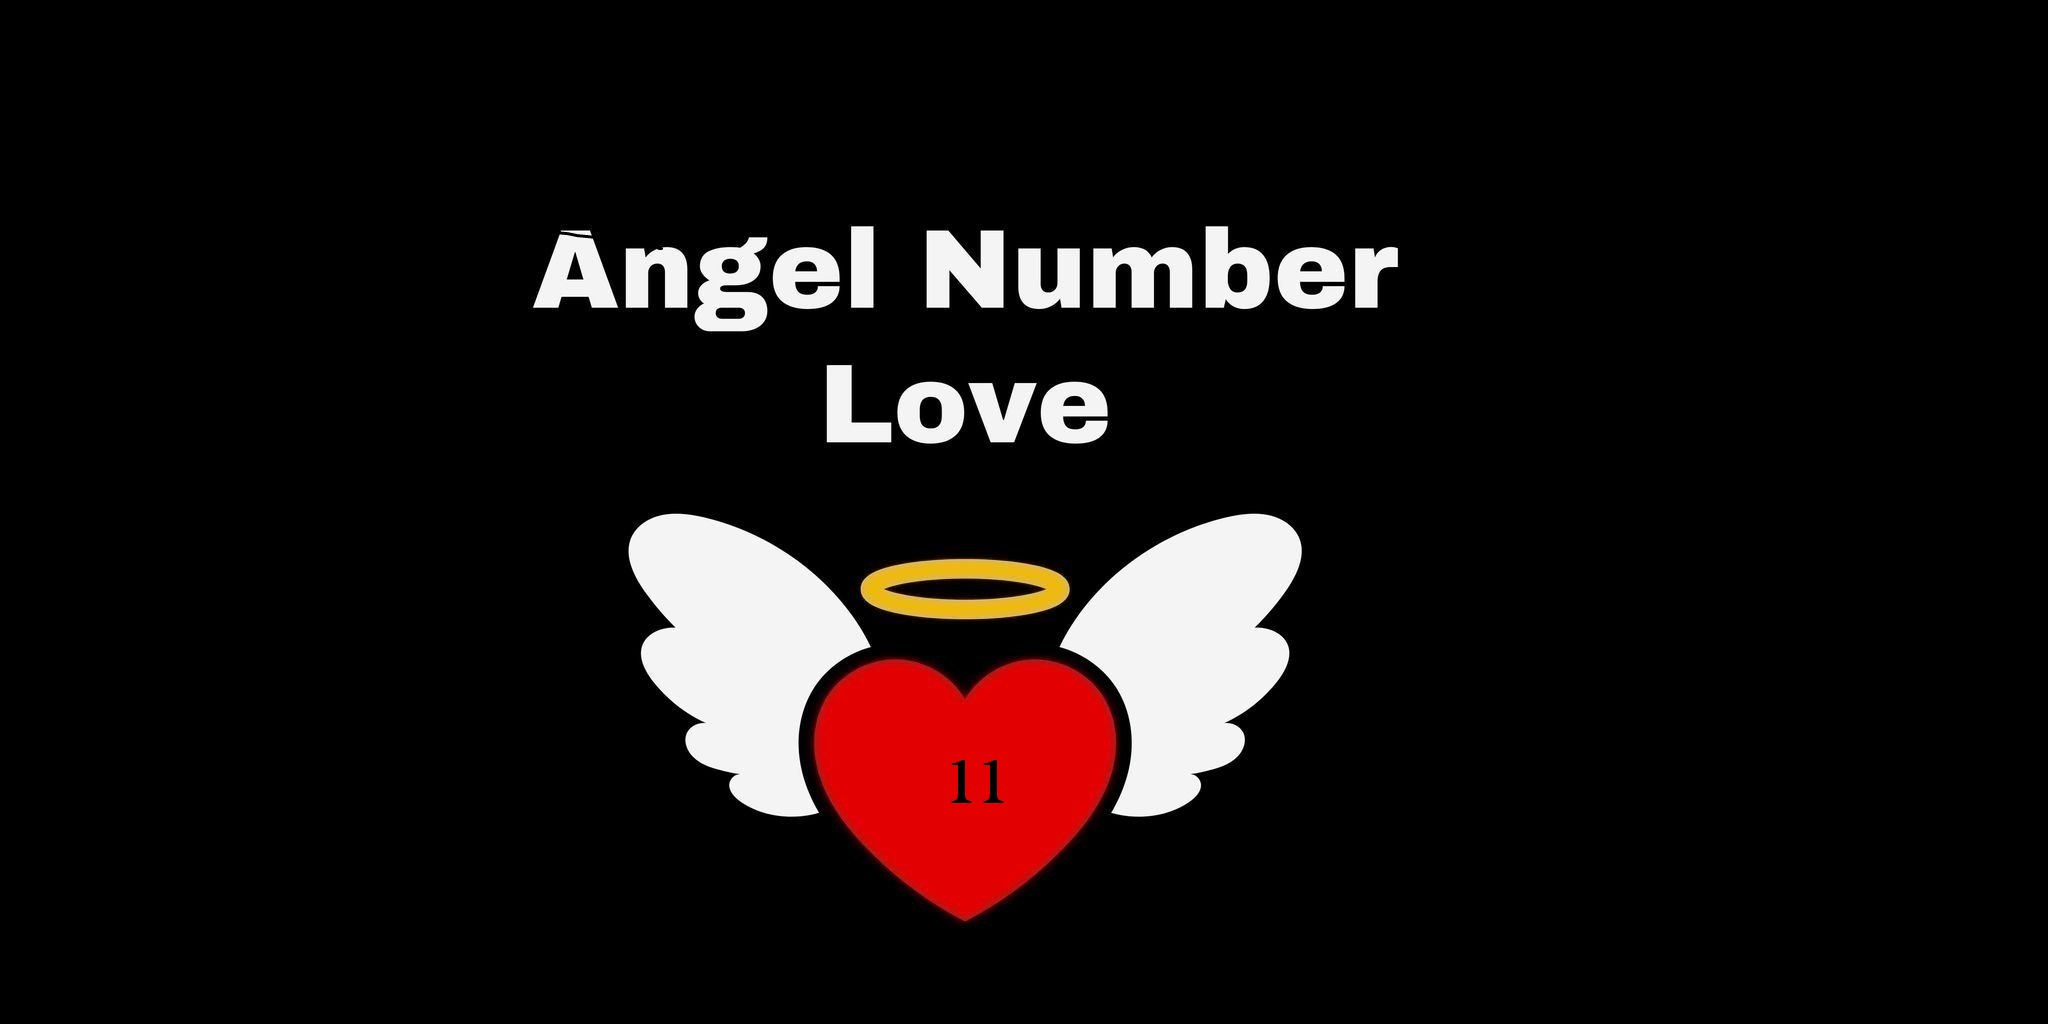 11 Angel Number Meaning In Love & Relationship